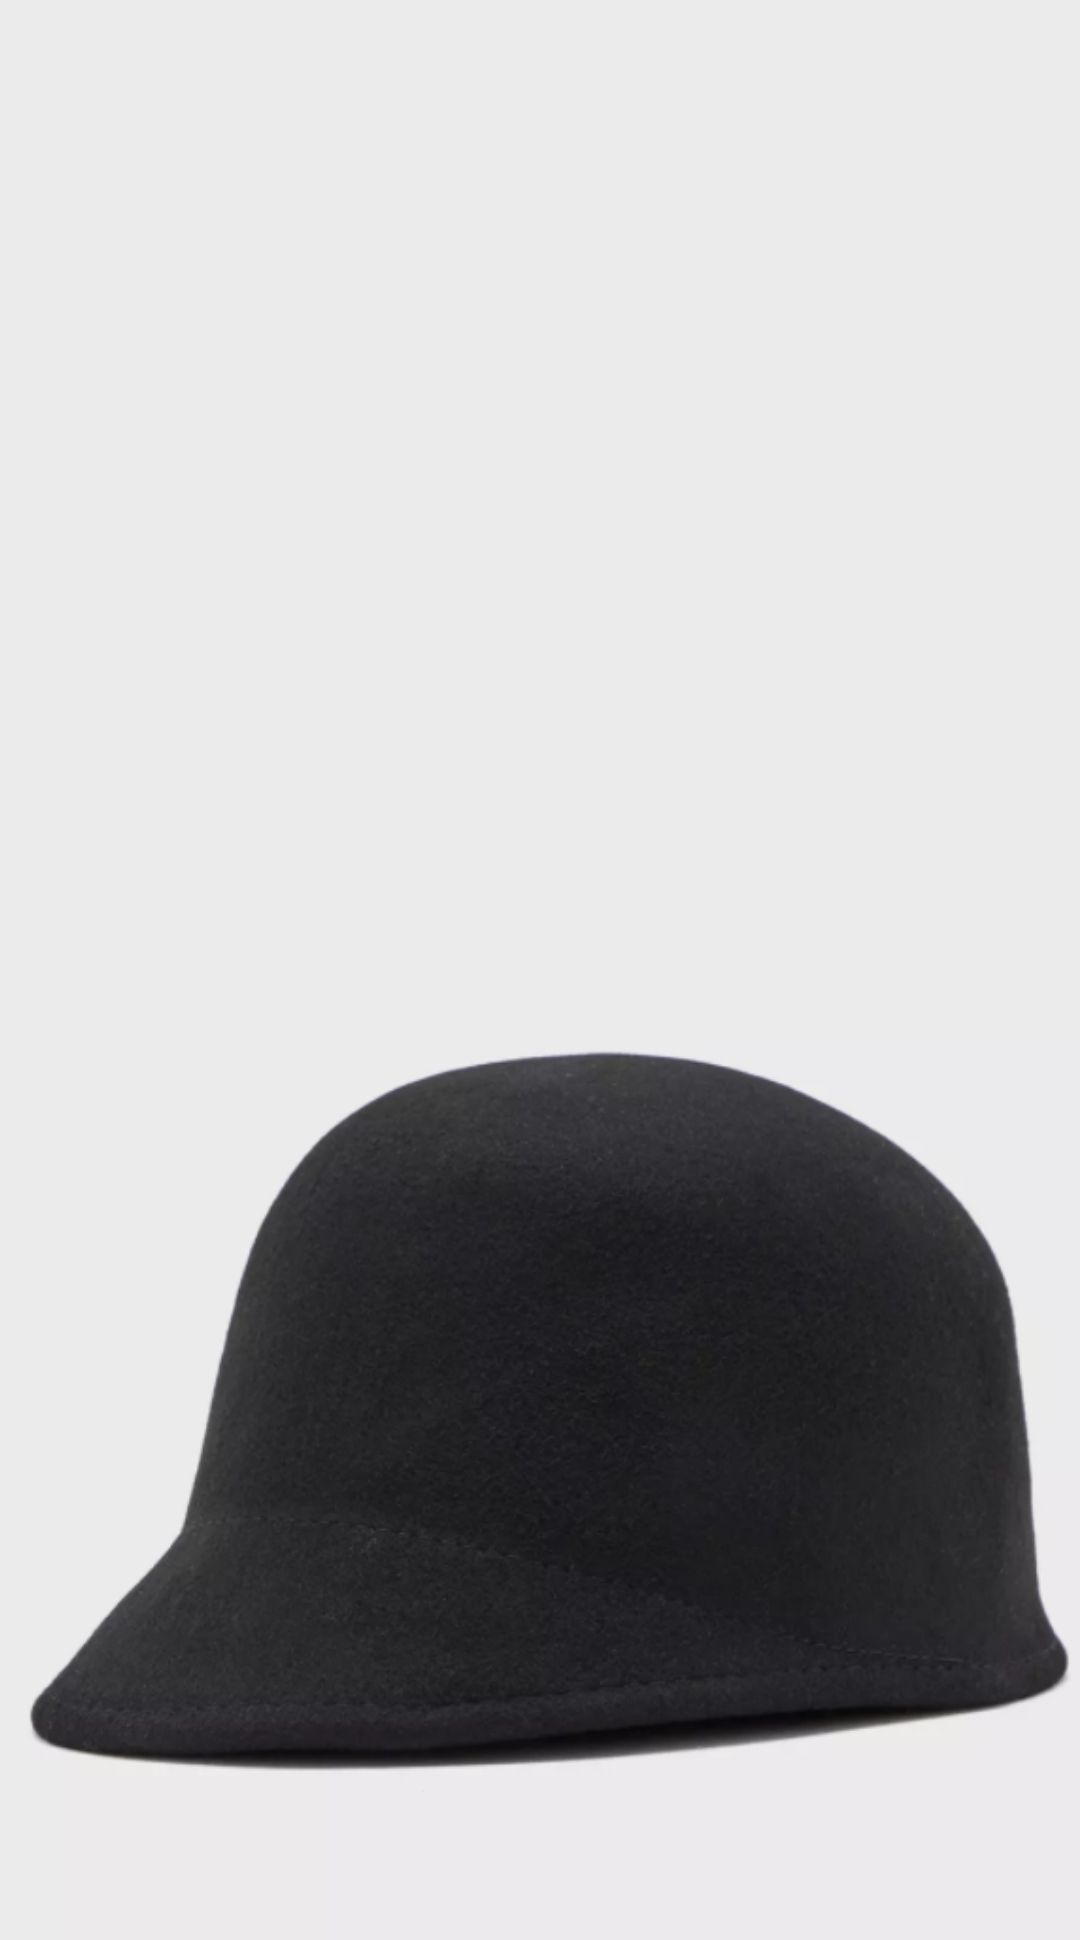 10 totally on-trend hats for autumn | Cosmopolitan Middle East